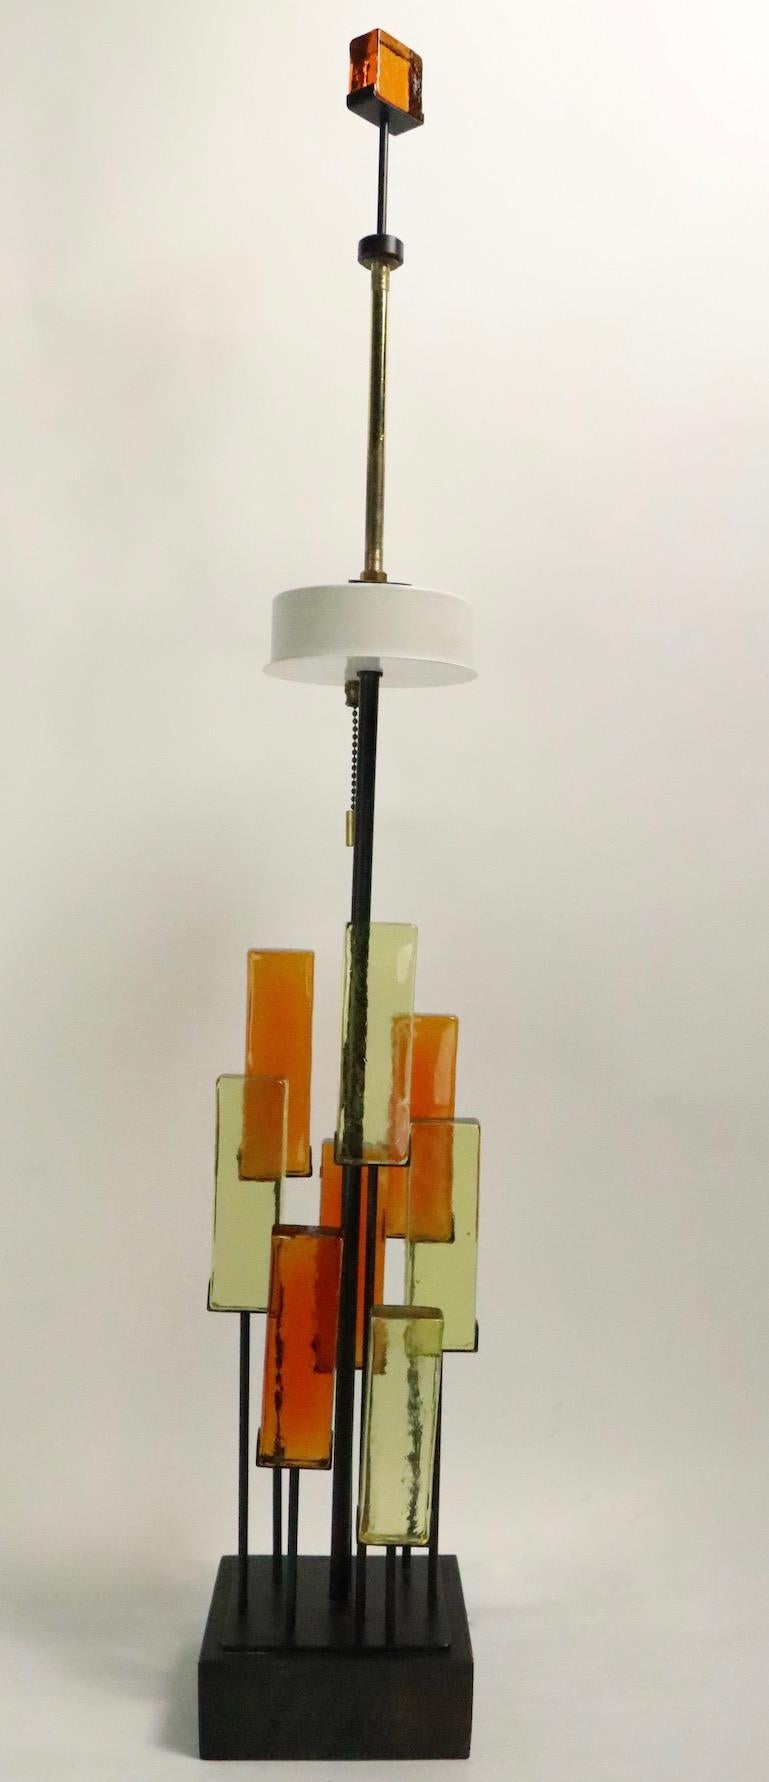 Rare glass block and wrought iron table lamp, design attributed to Gerald Thurston, for Lightolier. This example is in excellent original condition, clean, working and ready to use, it accepts three standard size screw in bulbs, which operate